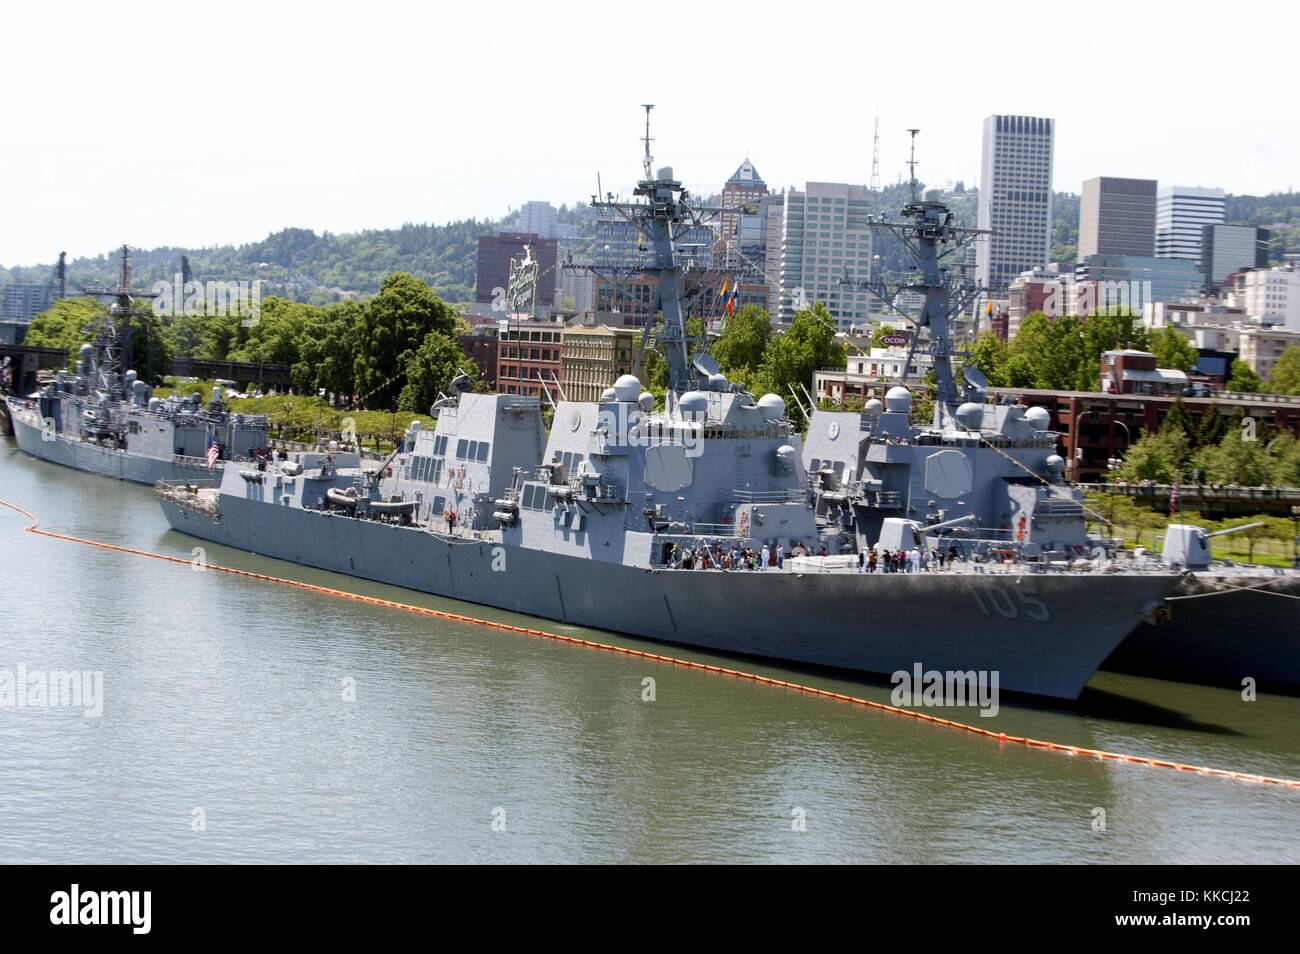 The guided-missile destroyers USS William P Lawrence DDG 110 and USS Dewey DDG 105, and the guided-missile frigate USS Ingraham FFG 61 are moored pierside at Tom McCall Waterfront Park during Fleet Week in Portland, Oregon, to celebrate the 105th annual Portland Rose Festival, Portland, Oregon, 2012. Image courtesy Mass Communication Specialist 2nd Class Scott A. McCall/US Navy. Stock Photo